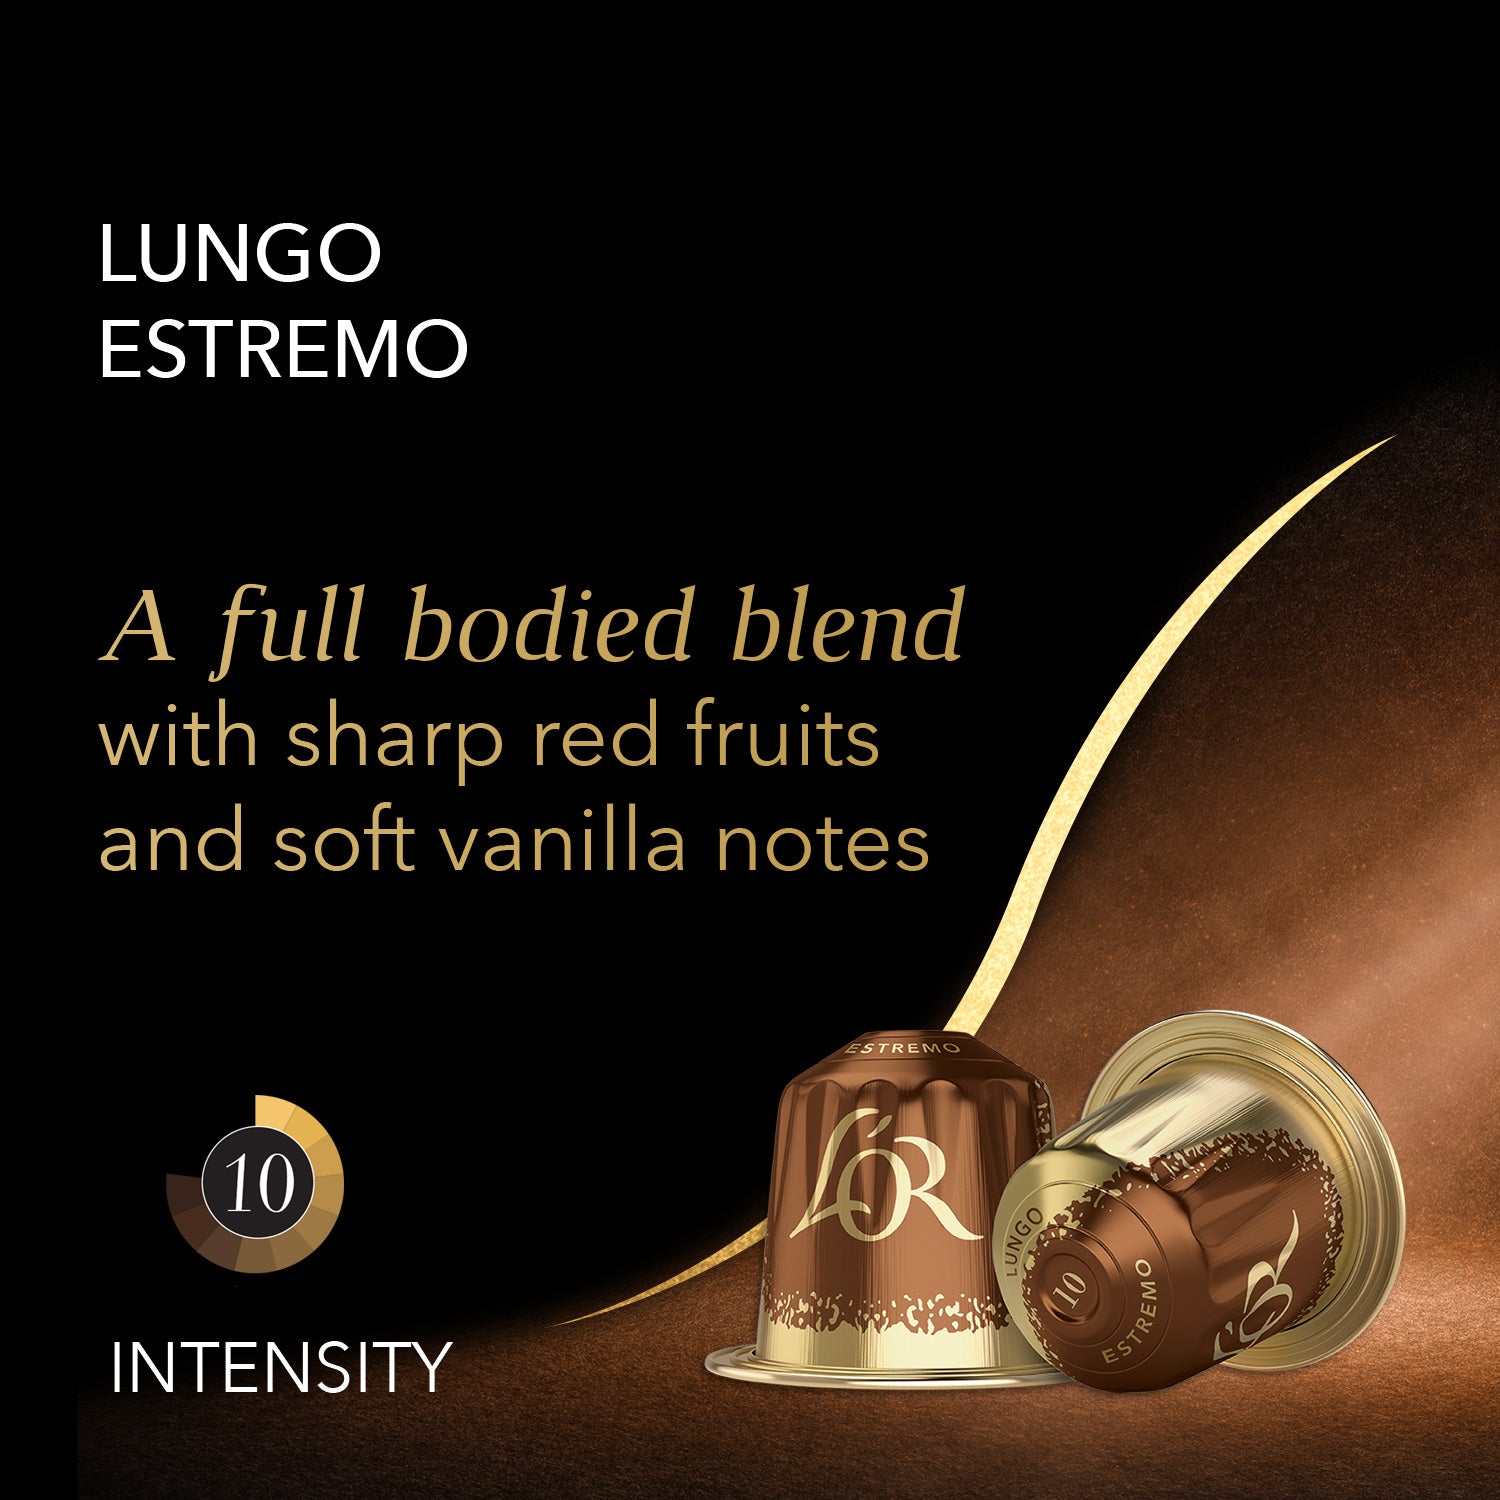 A full-bodied blend with sharp red fruits and soft vanilla notes.